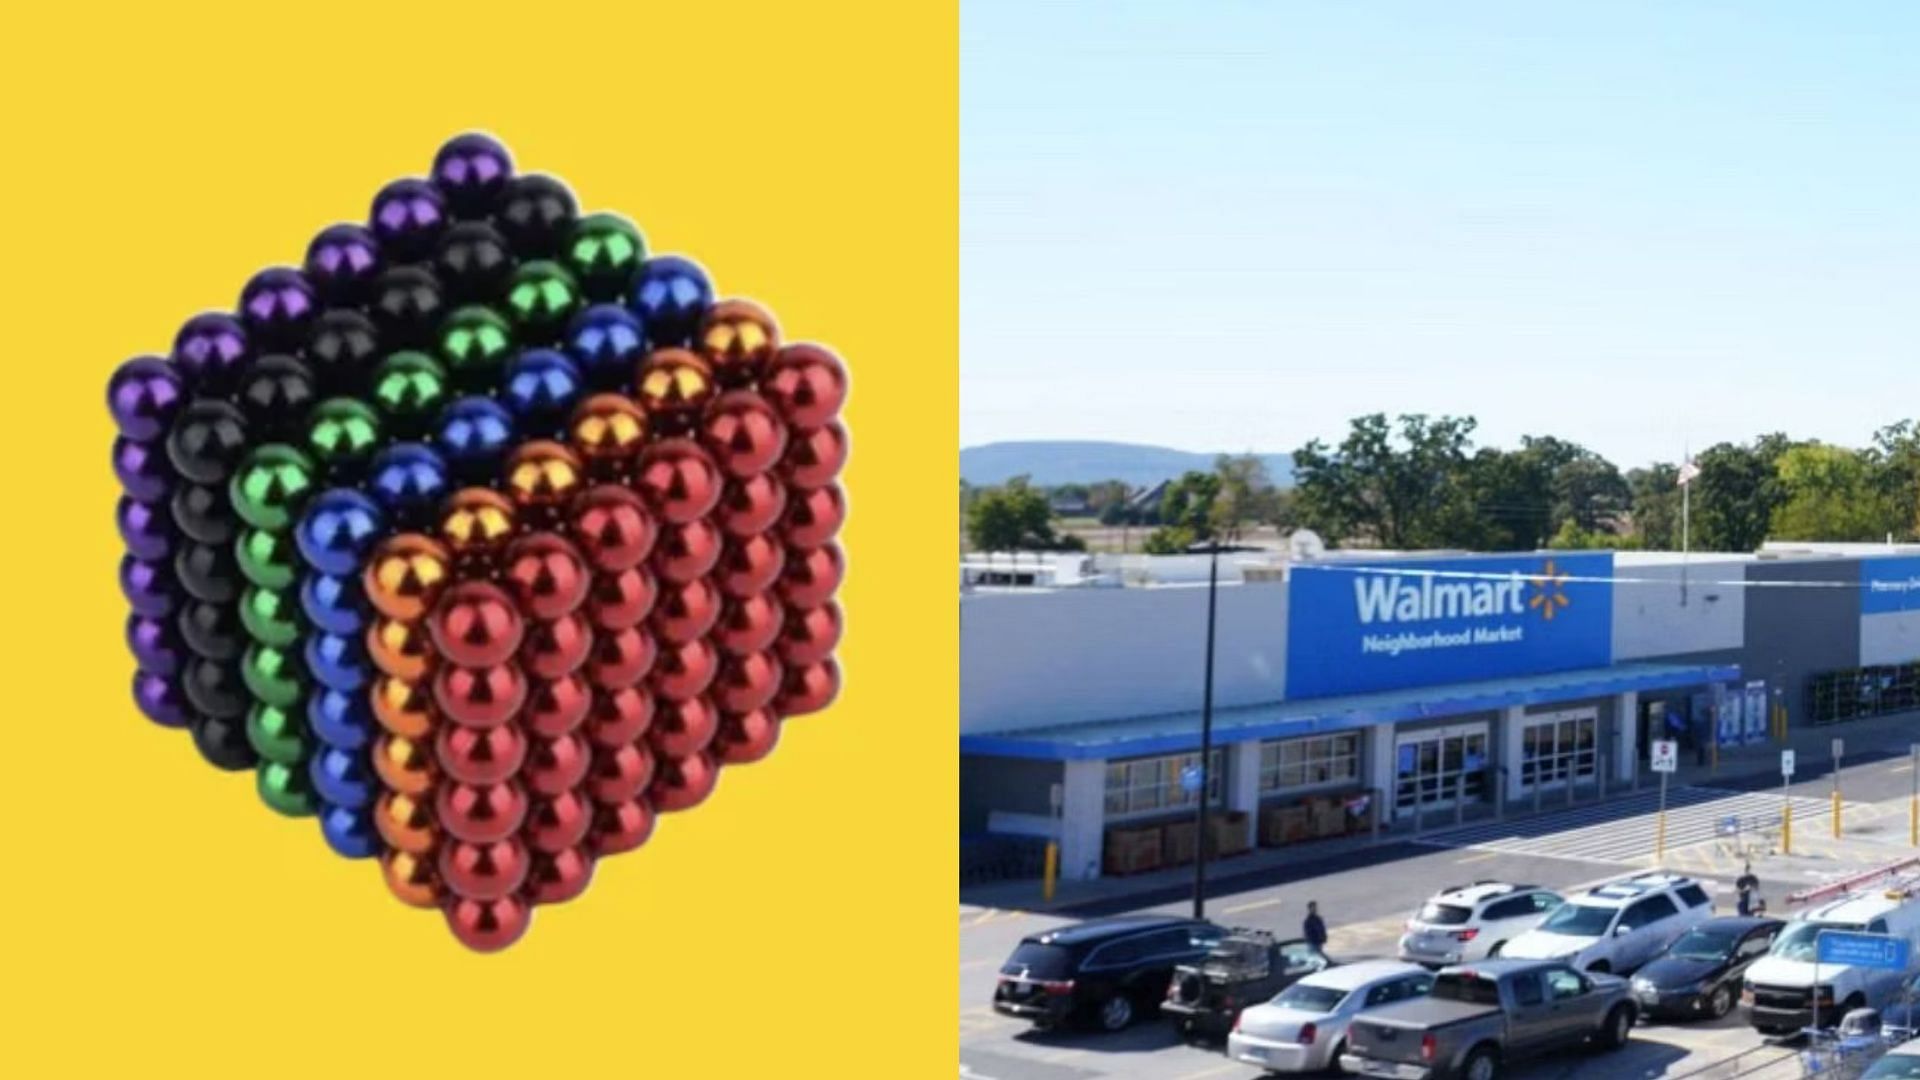 Walmart recently called off its magnetic balls (Image via CPSC / Walmart)